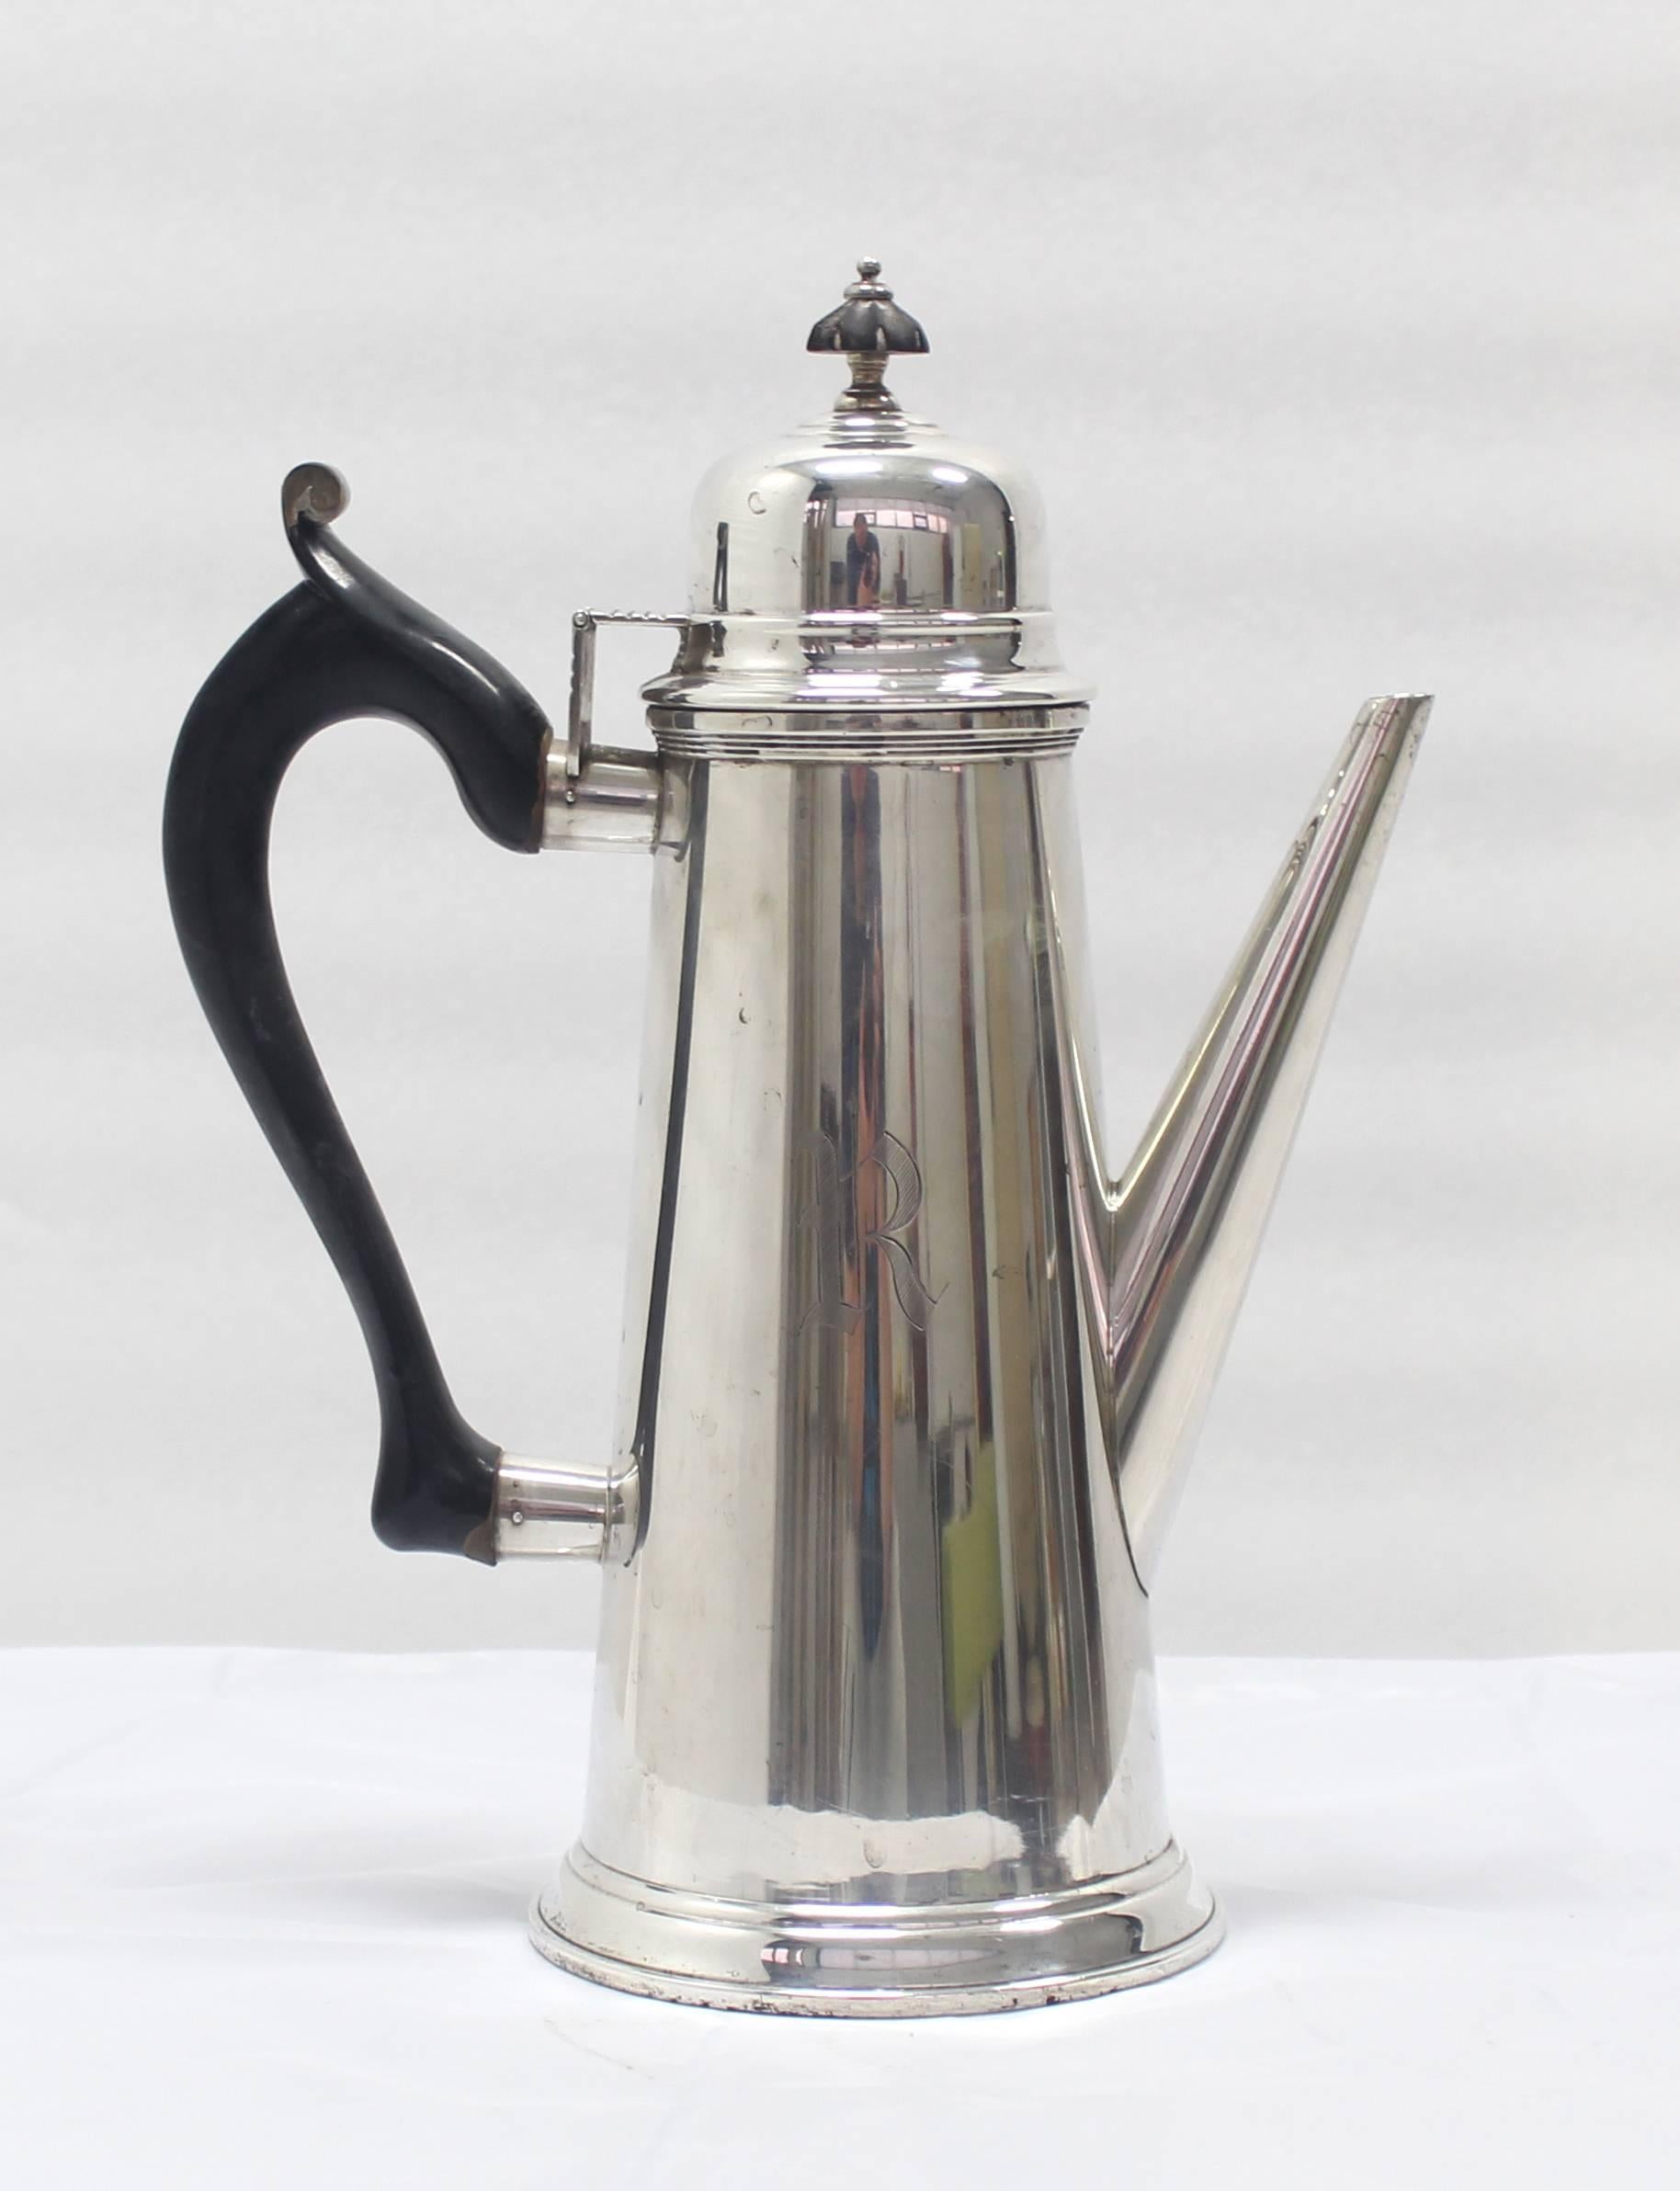 Sterling Silver Tea Coffee Pot Jacob Hurd by Frank Whiting In Excellent Condition For Sale In Rockaway, NJ